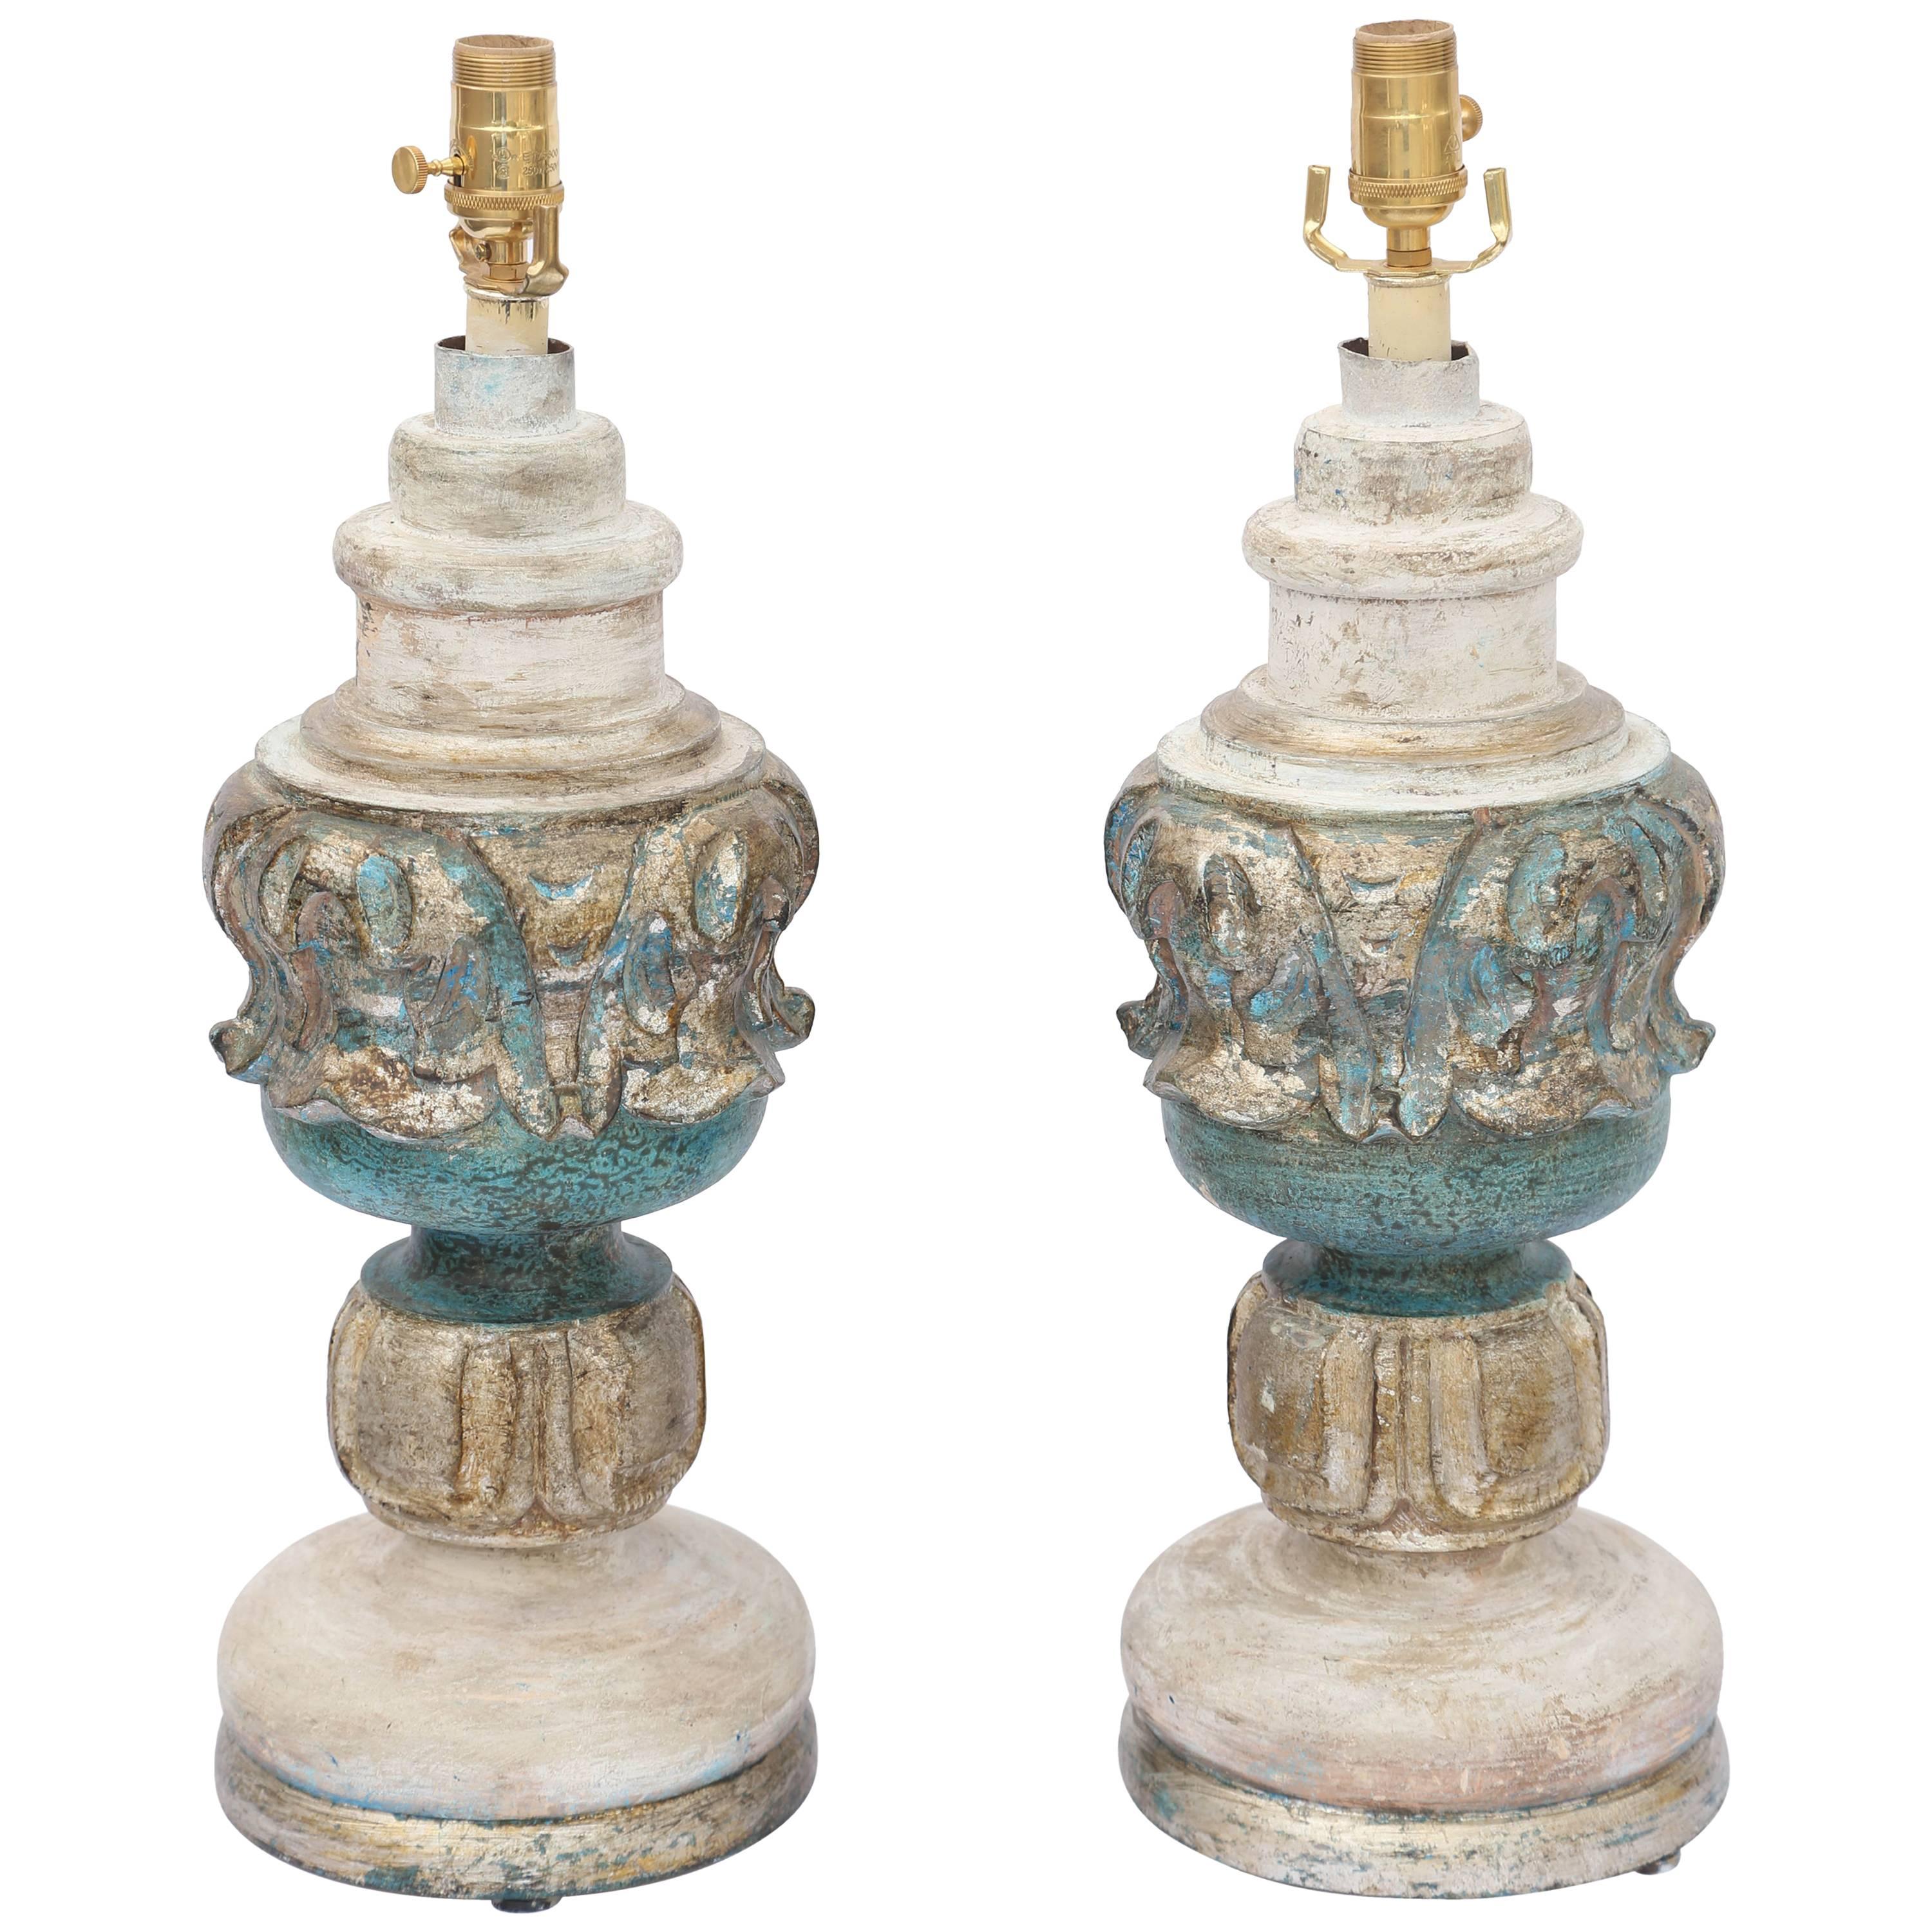 Pair of Painted and Parcel Silver Gilt Carved Wood Finial Lamps